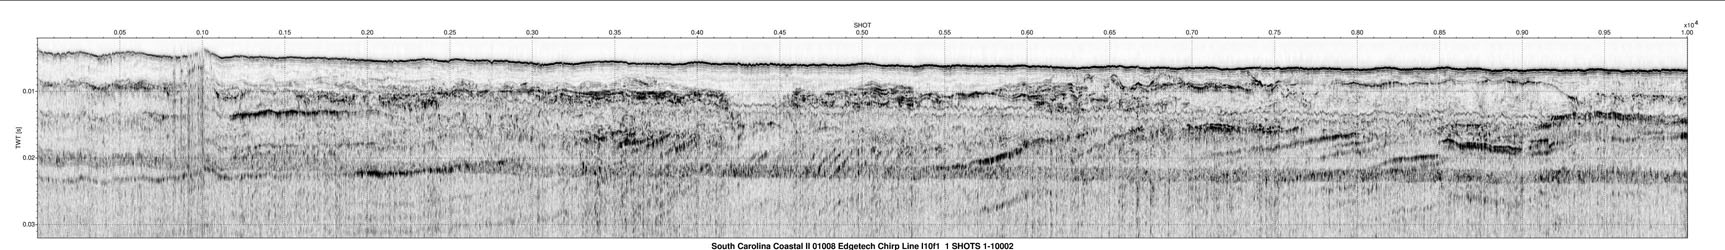 Image of seismic-reflection profile as stored within ArcMap Document.